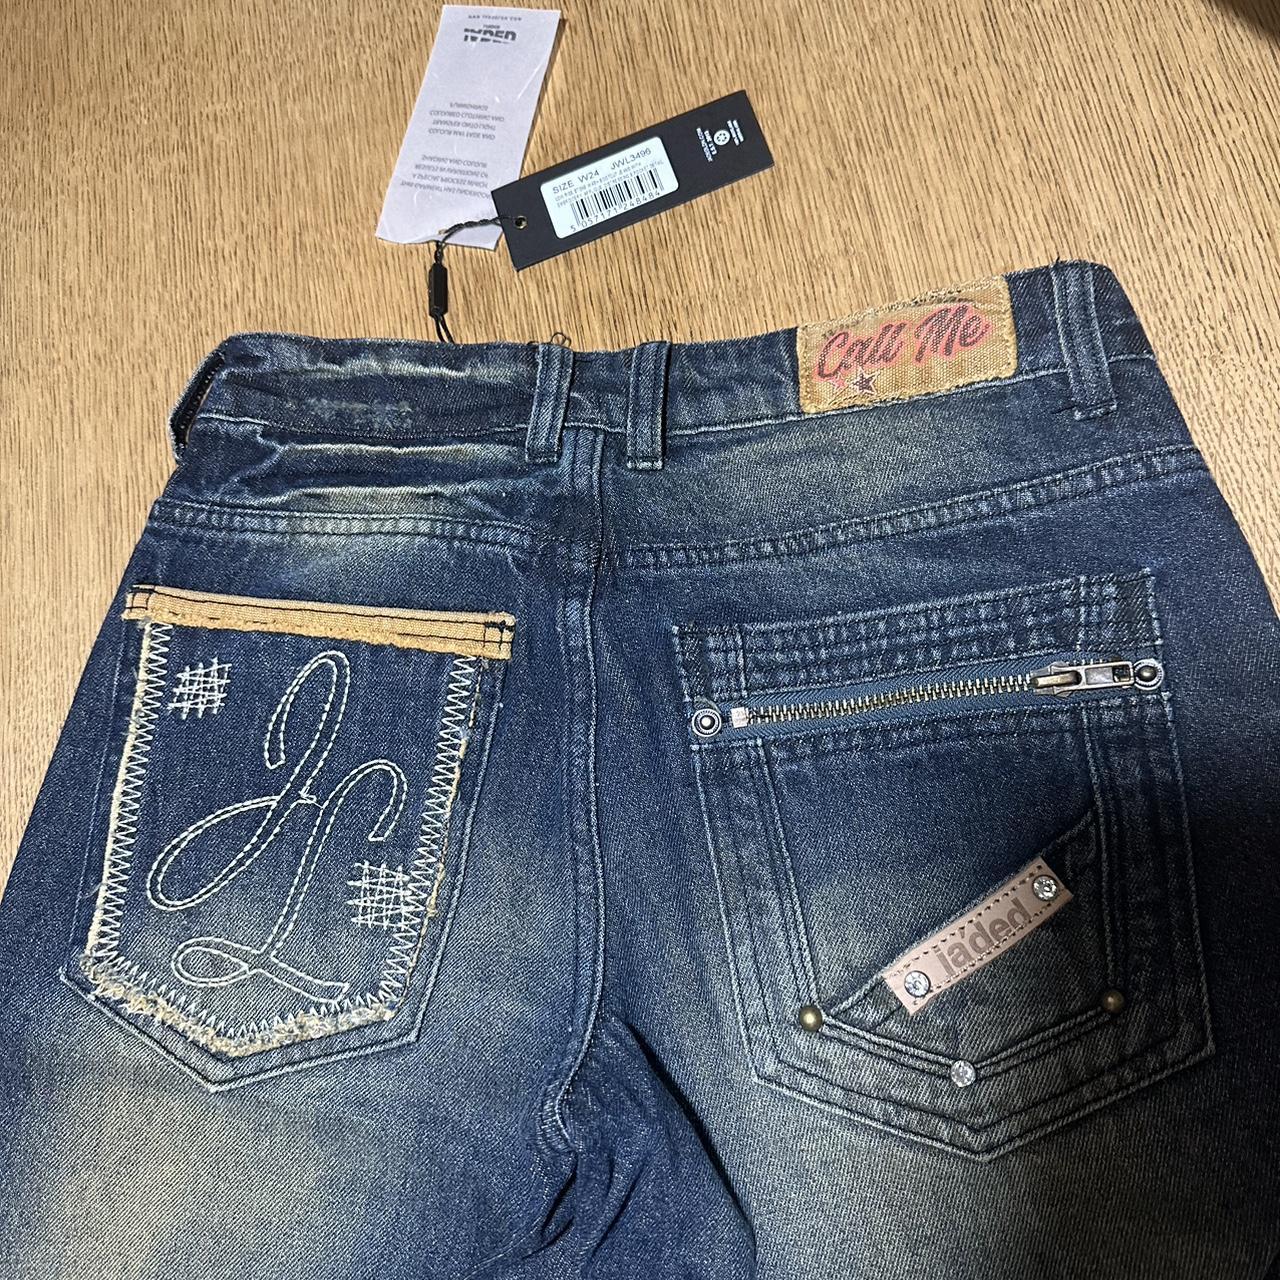 Jaded London low rise call me bootcut jeans - W24... - Depop